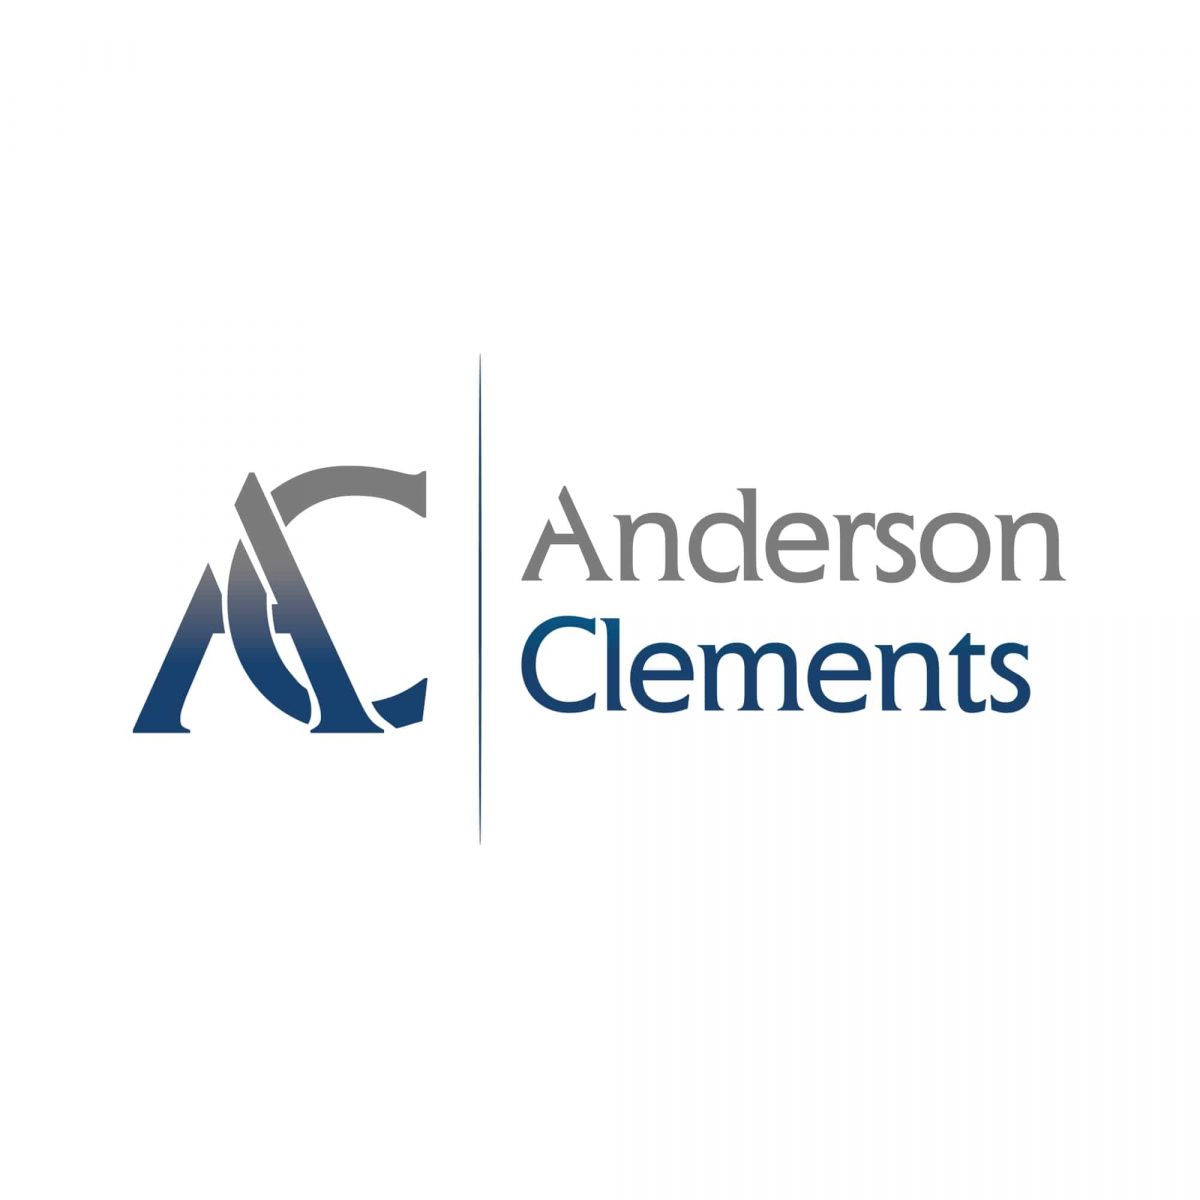 Anderson Clements logo